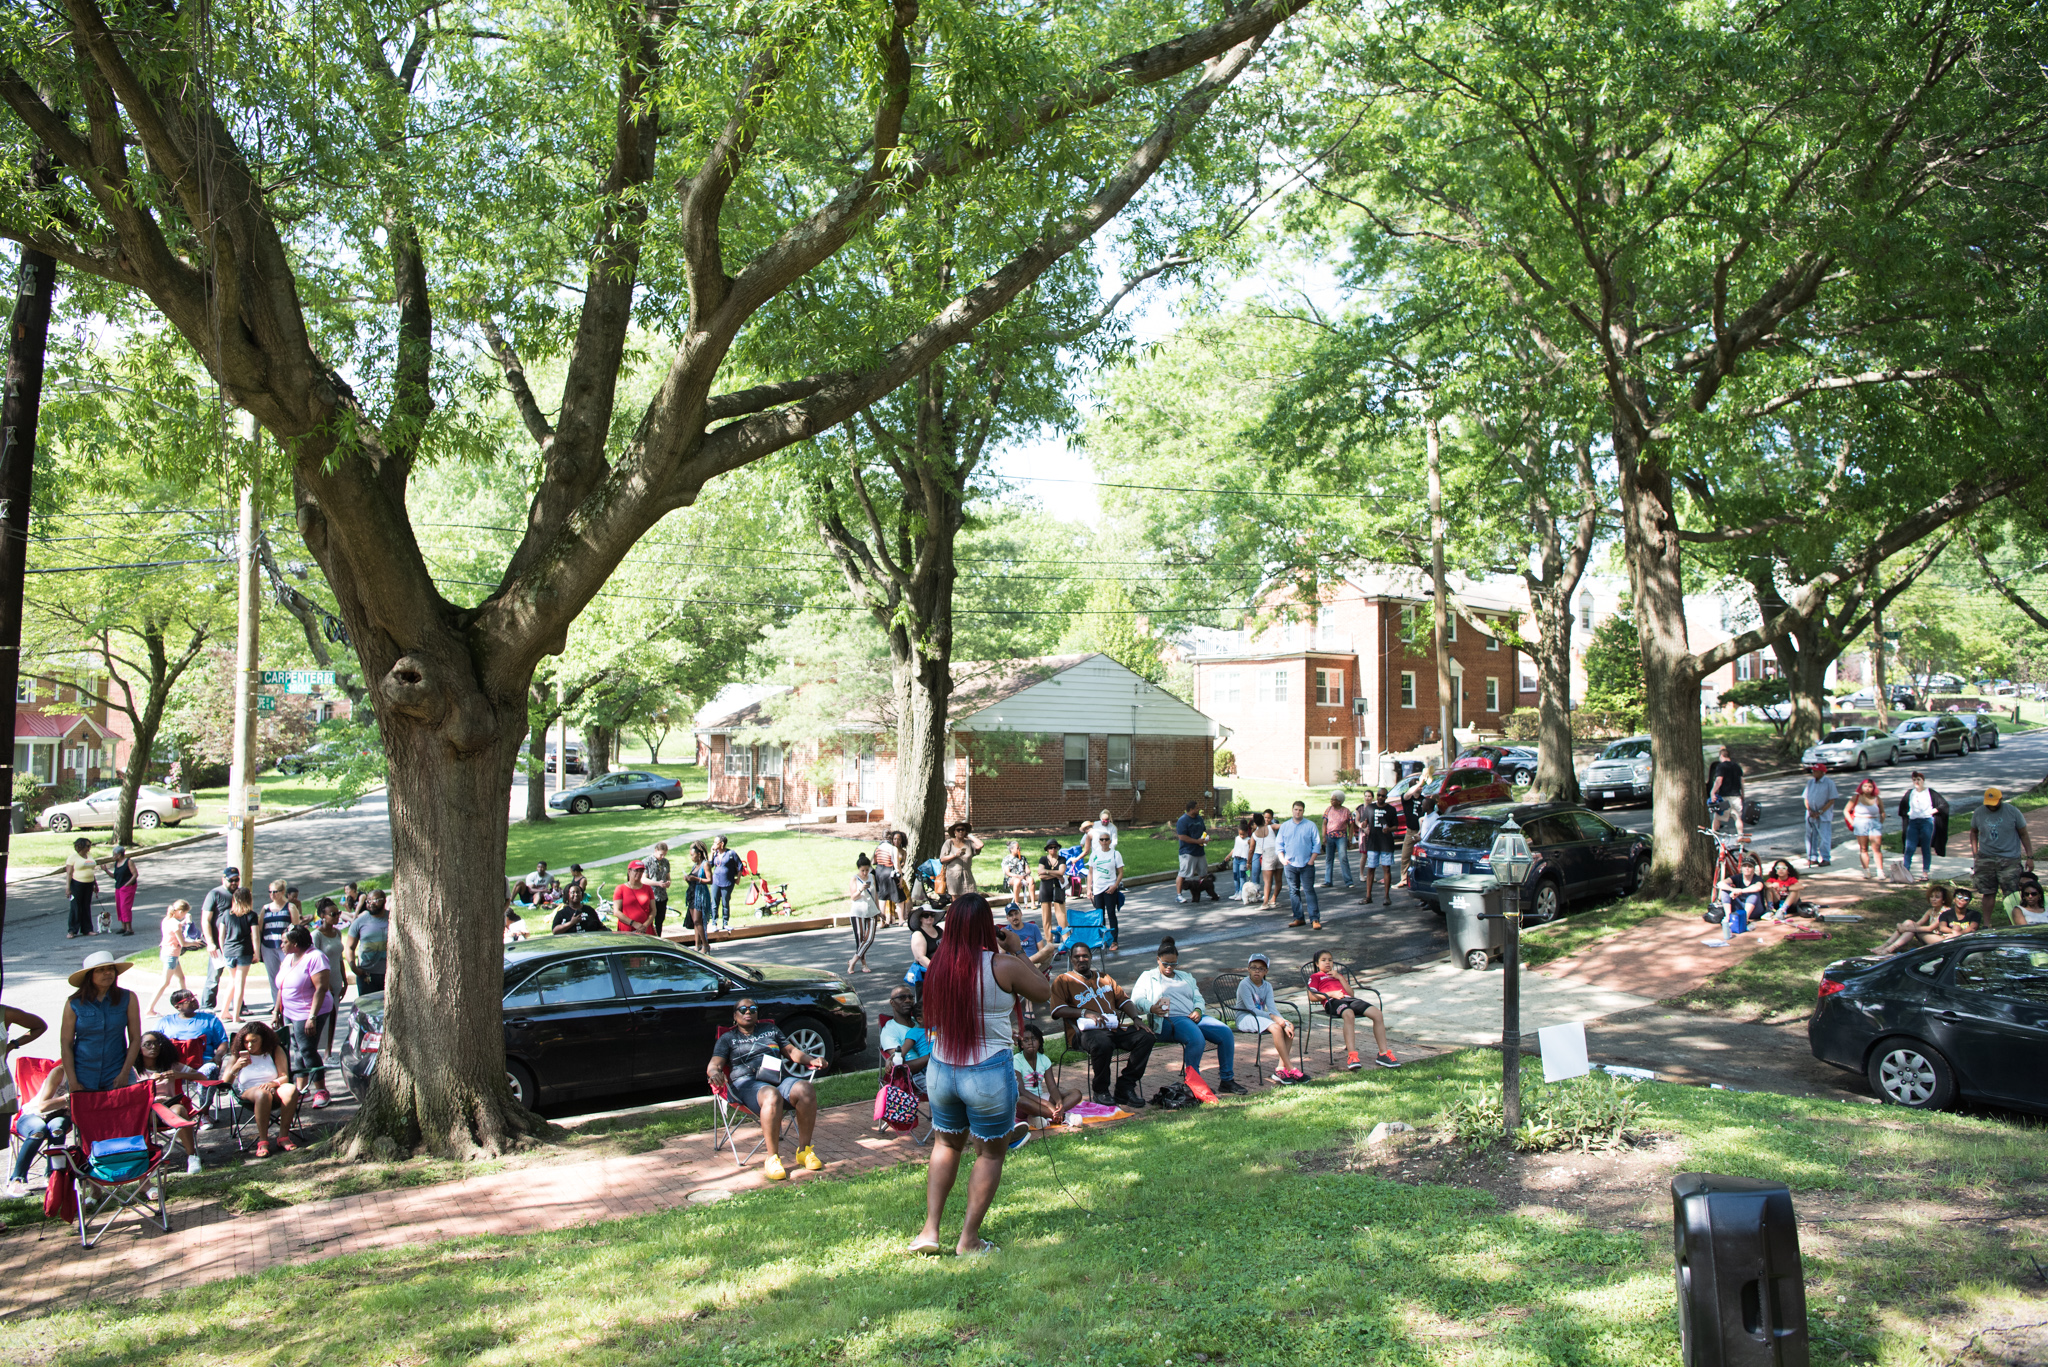 The Penn Branch community hosted the first SE Porchfest DC Refined